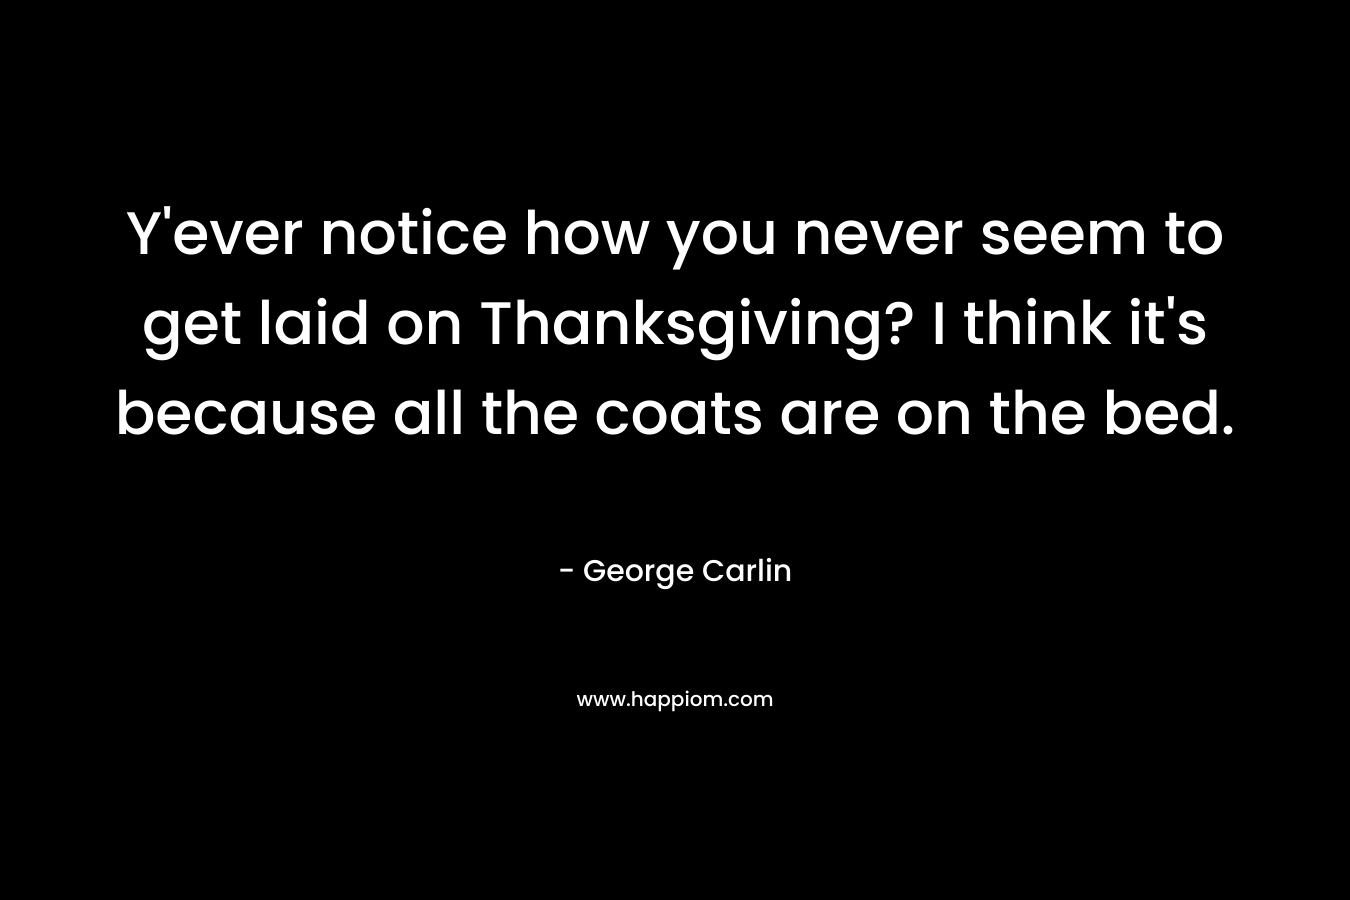 Y’ever notice how you never seem to get laid on Thanksgiving? I think it’s because all the coats are on the bed. – George Carlin